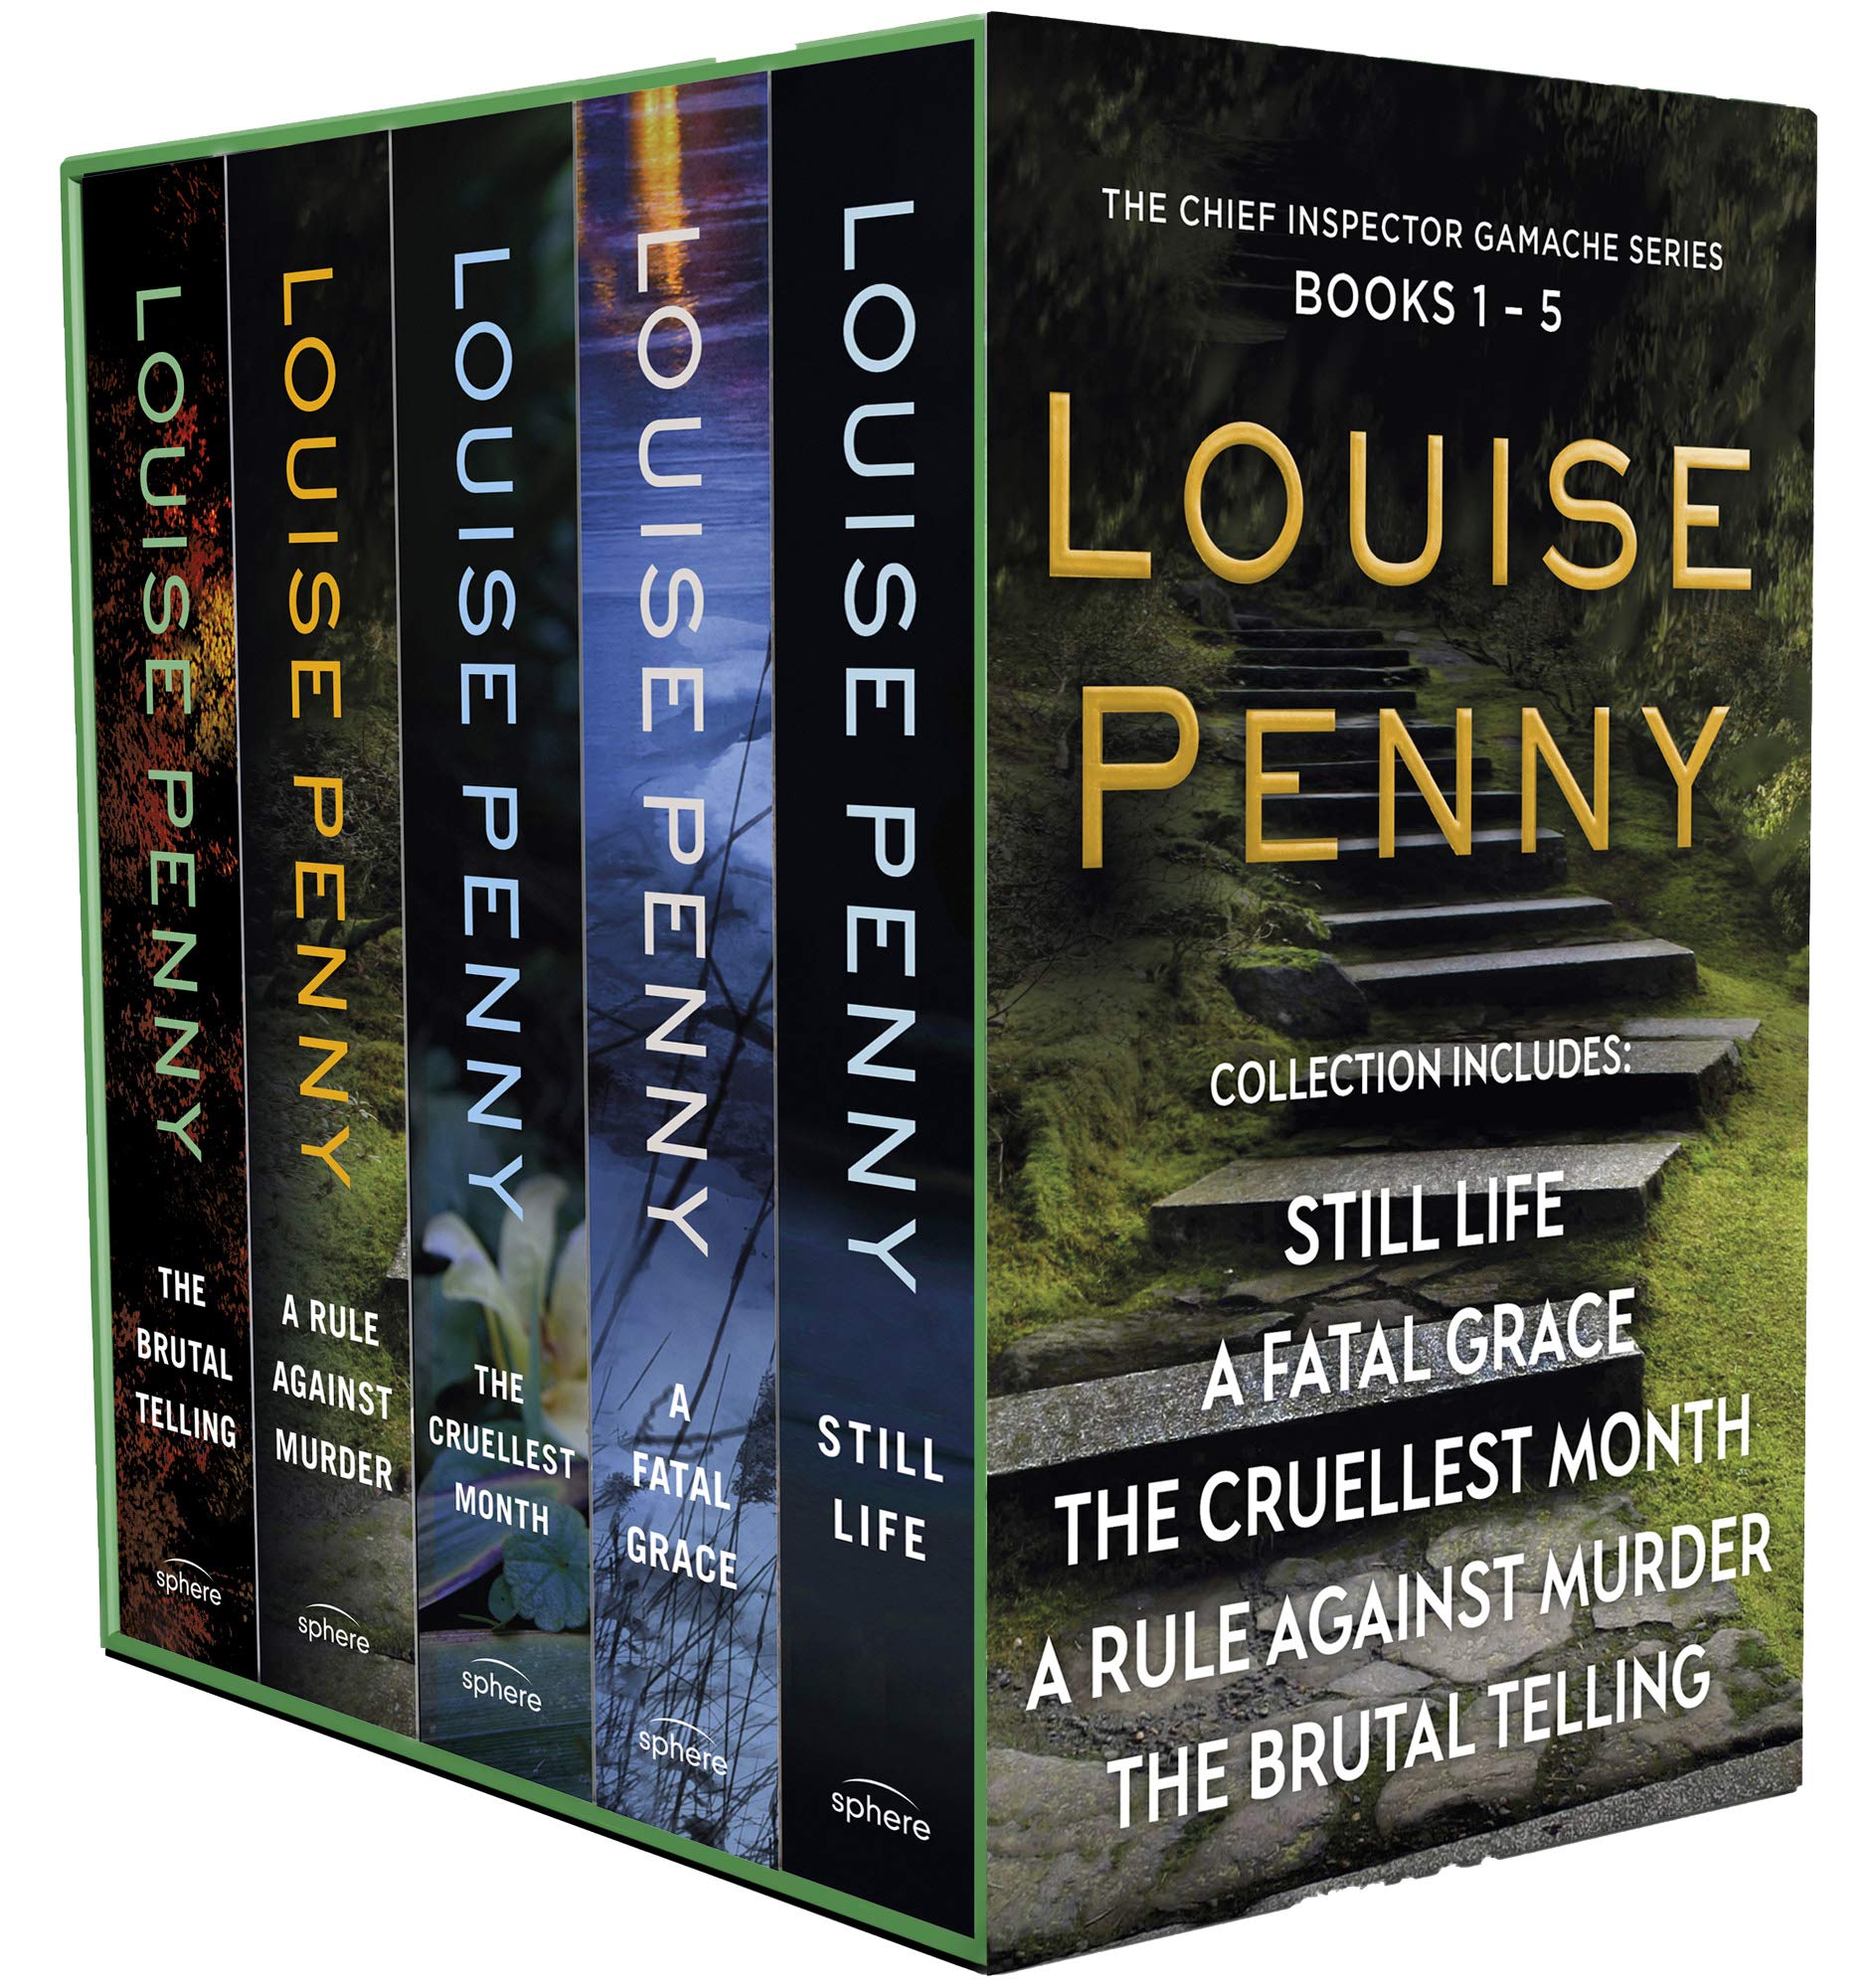 The Chief Inspector Gamache Series Books 1 - 5 Collection Box Set by Louise Penny - Lets Buy Books